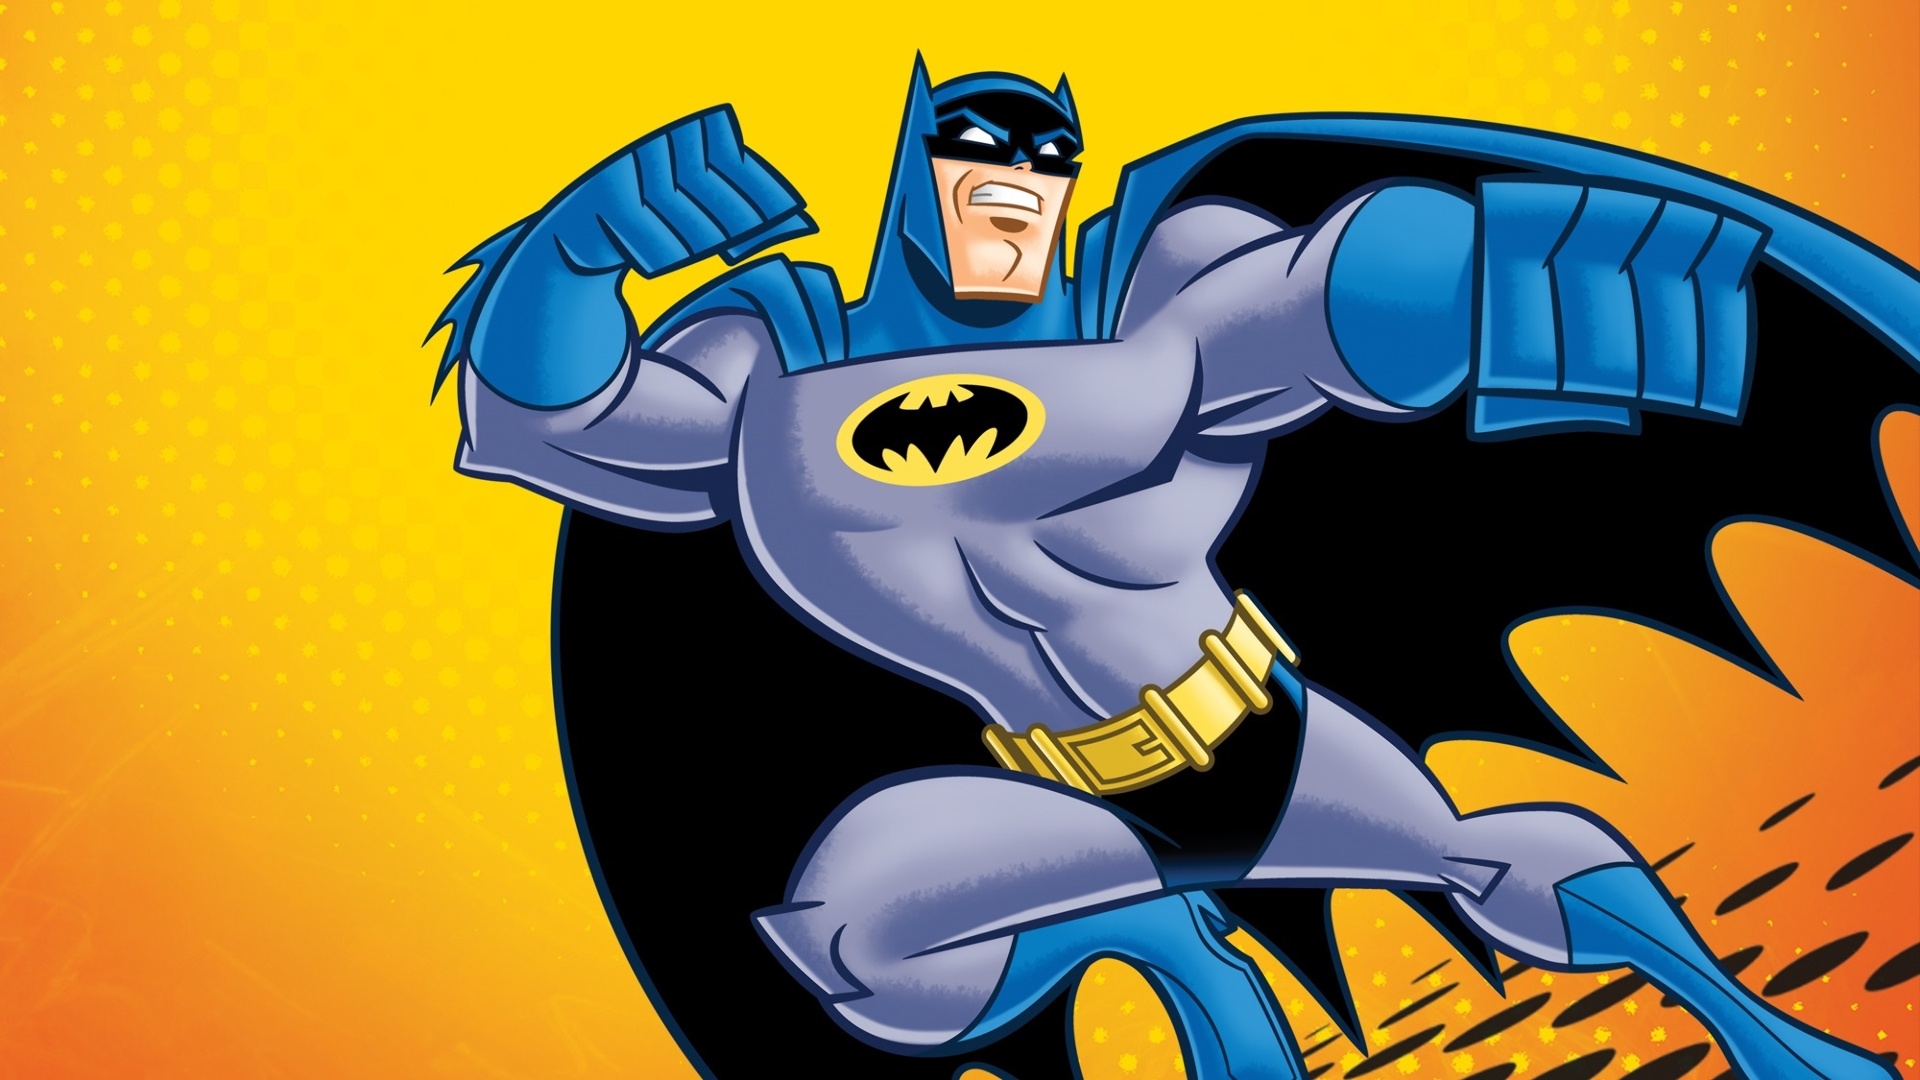 Batman: The Brave and the Bold: The Videogame